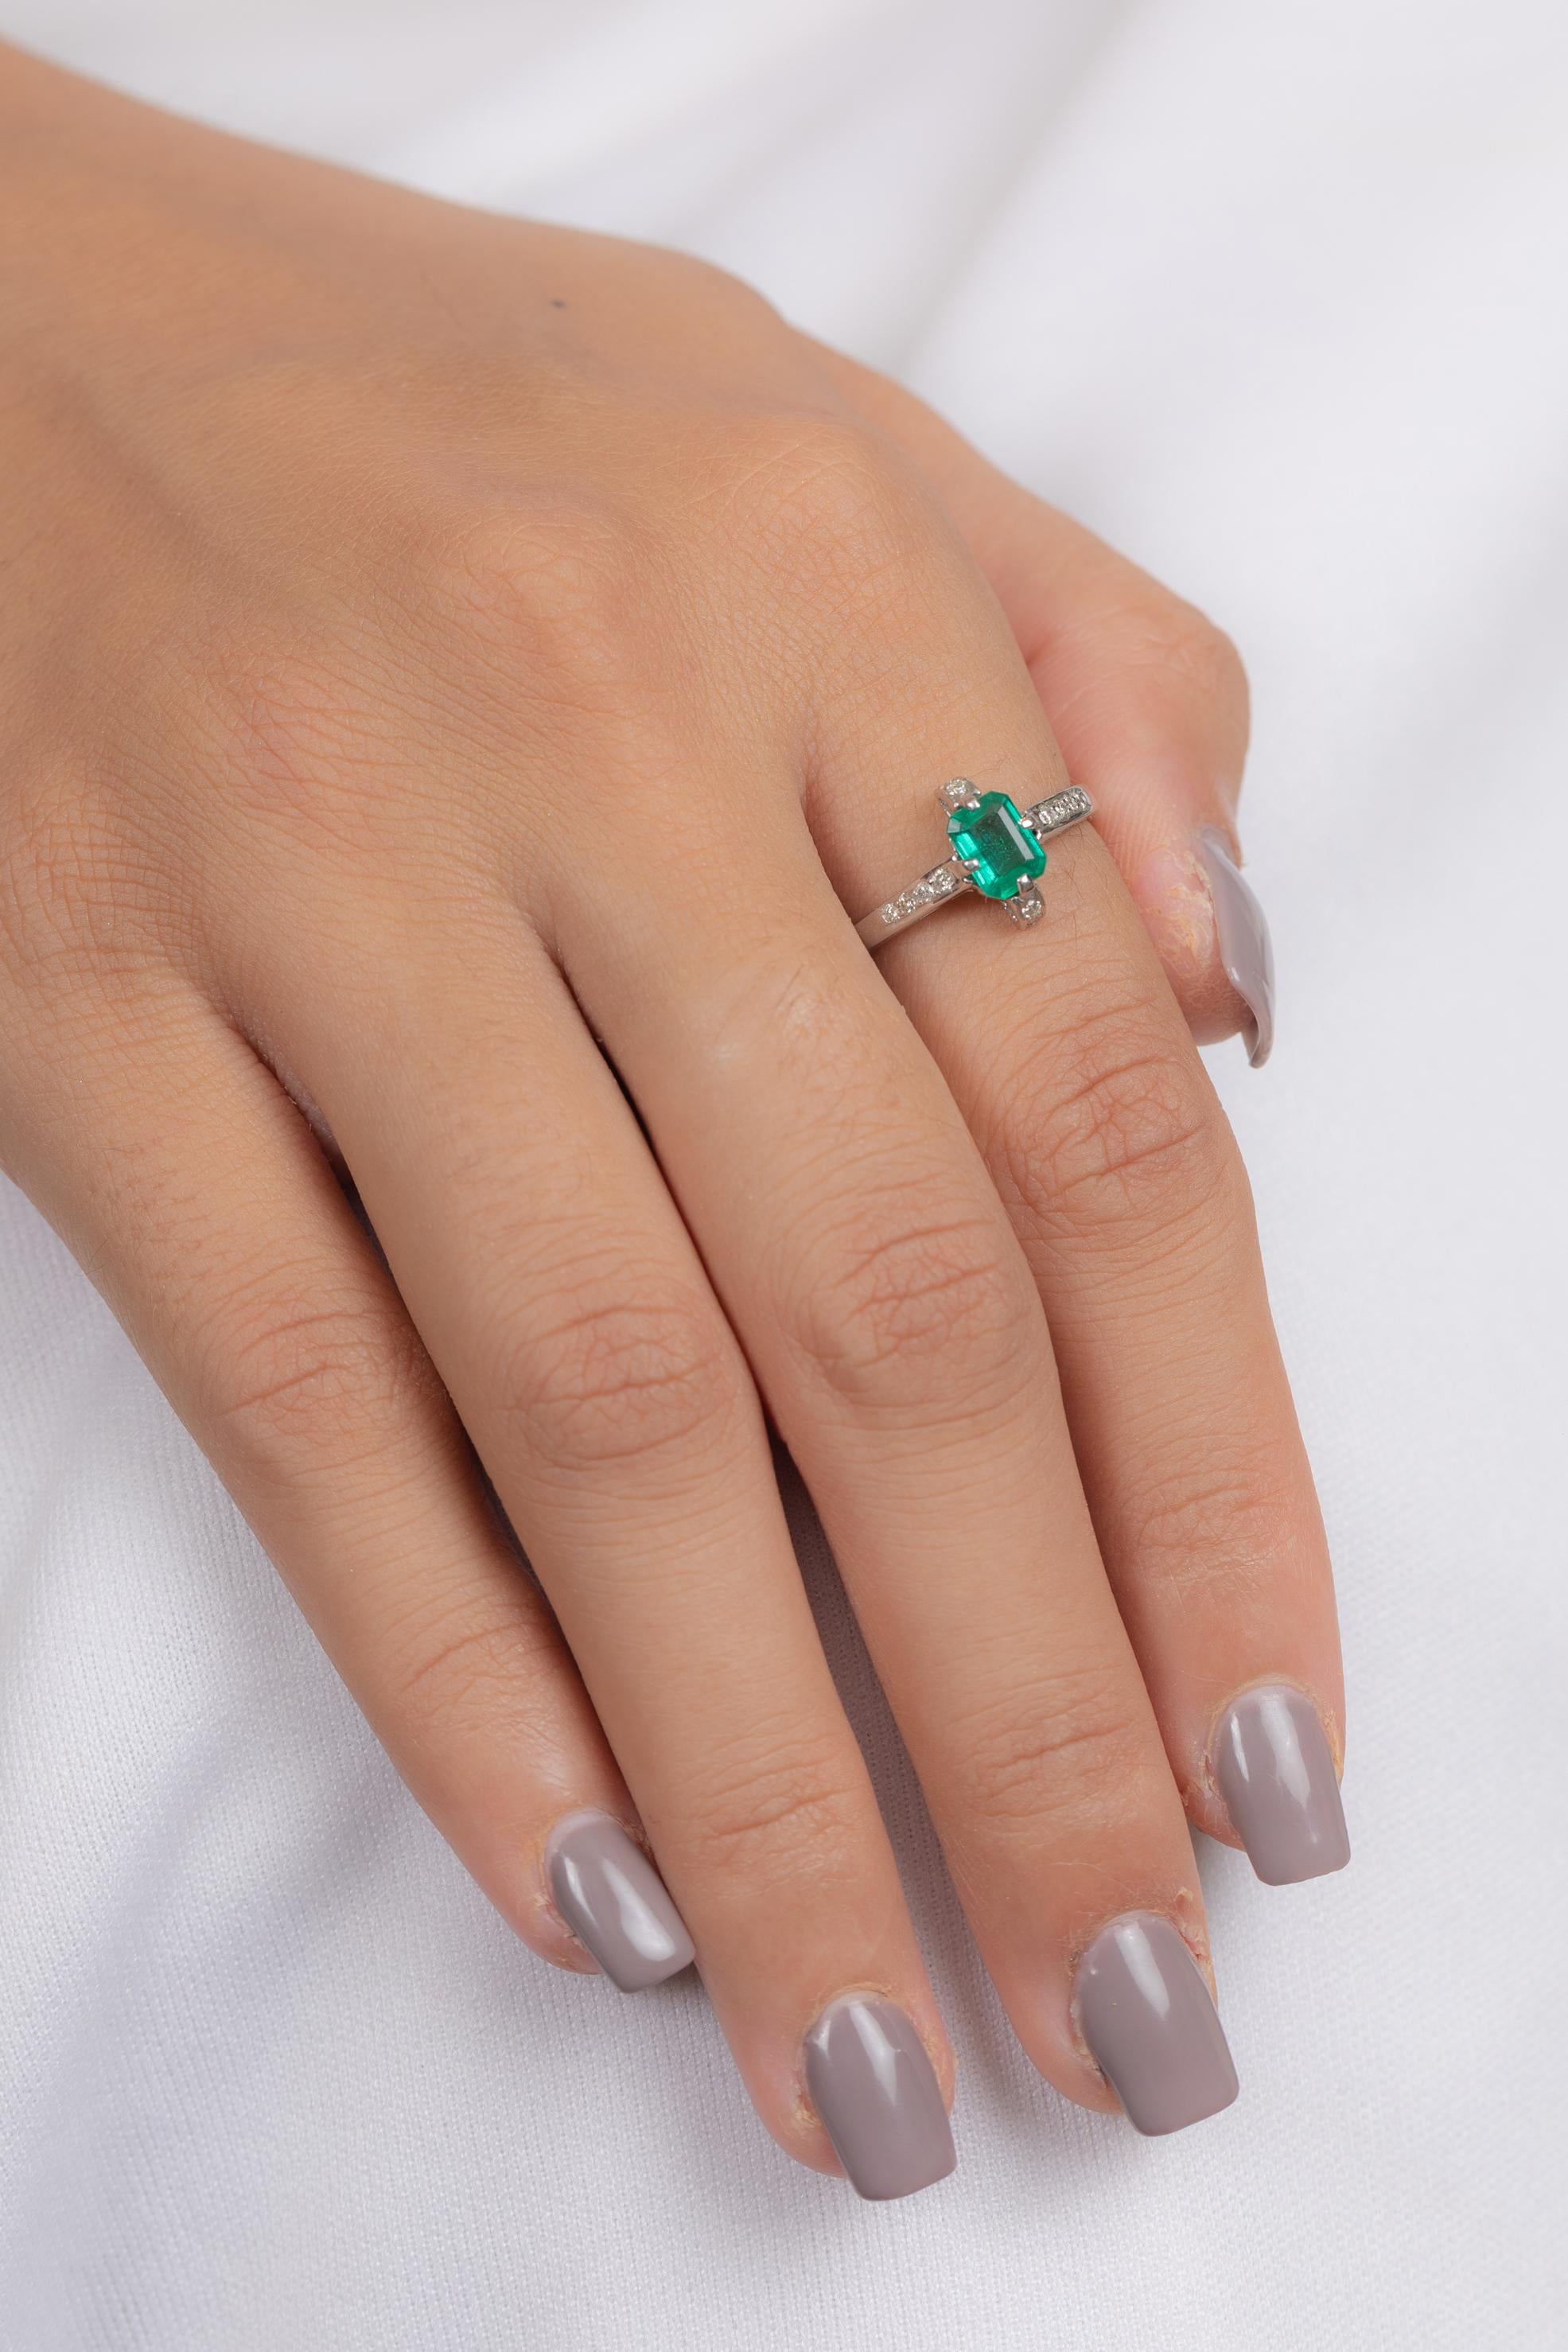 For Sale:  14K White Gold Emerald Ring with Diamonds  3